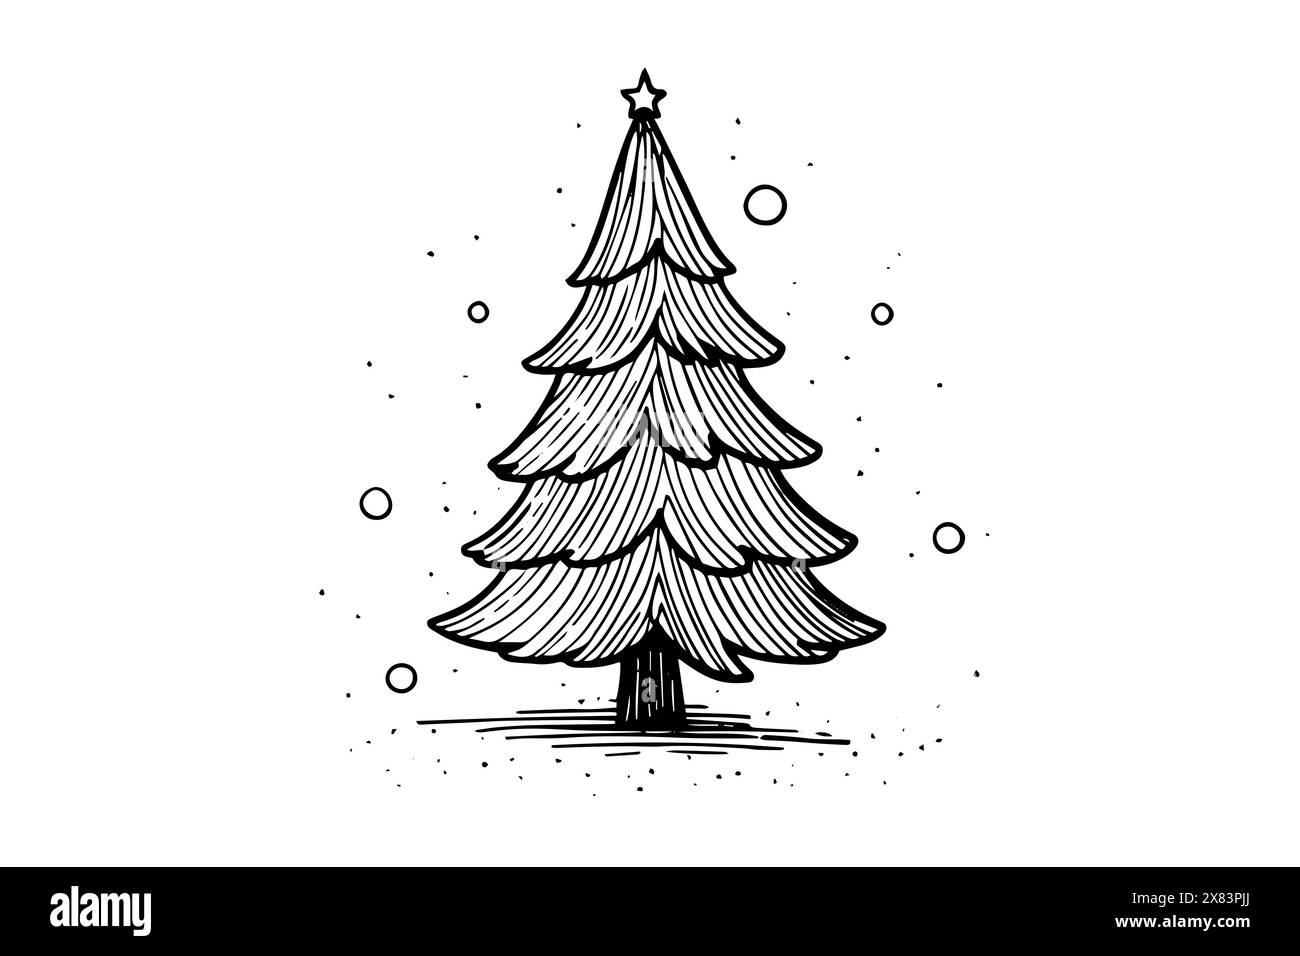 Spruce sketch in engraving style silhouette. Tree pine simple vector illustration. Stock Vector